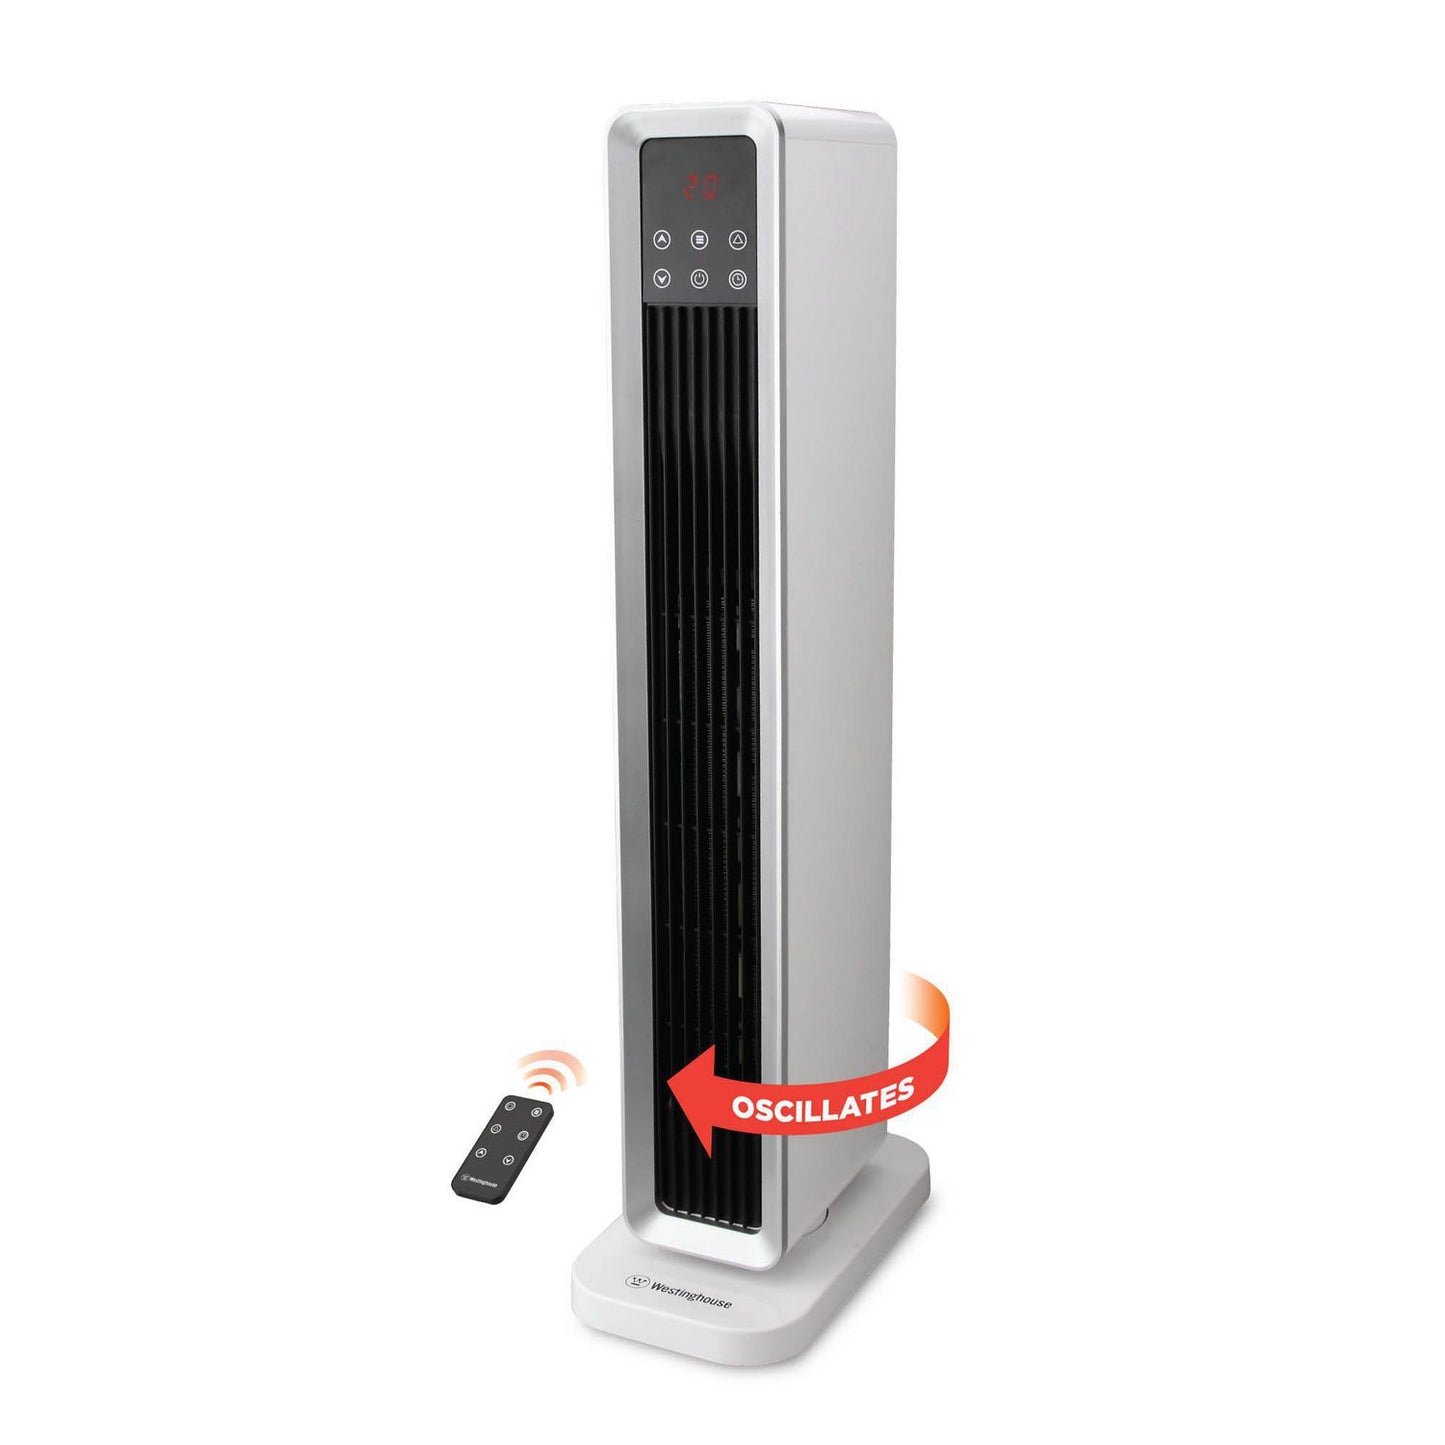 Westinghouse WSHPTC91H 24" Ceramic Tower Heater White One Size - Open Box